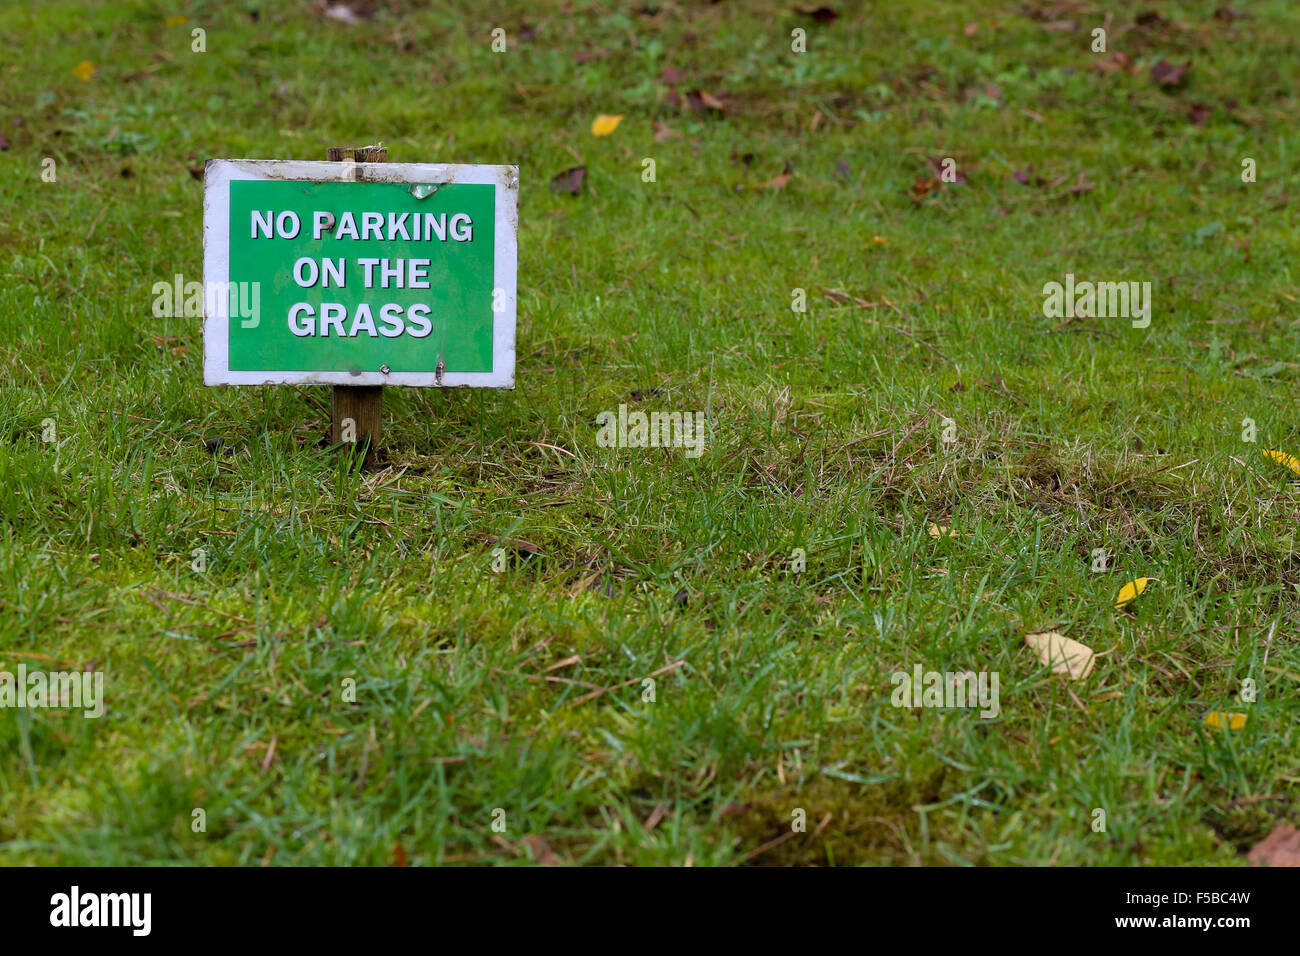 No parking on the grass sign over green lawn with autumn leaves, copy space Stock Photo